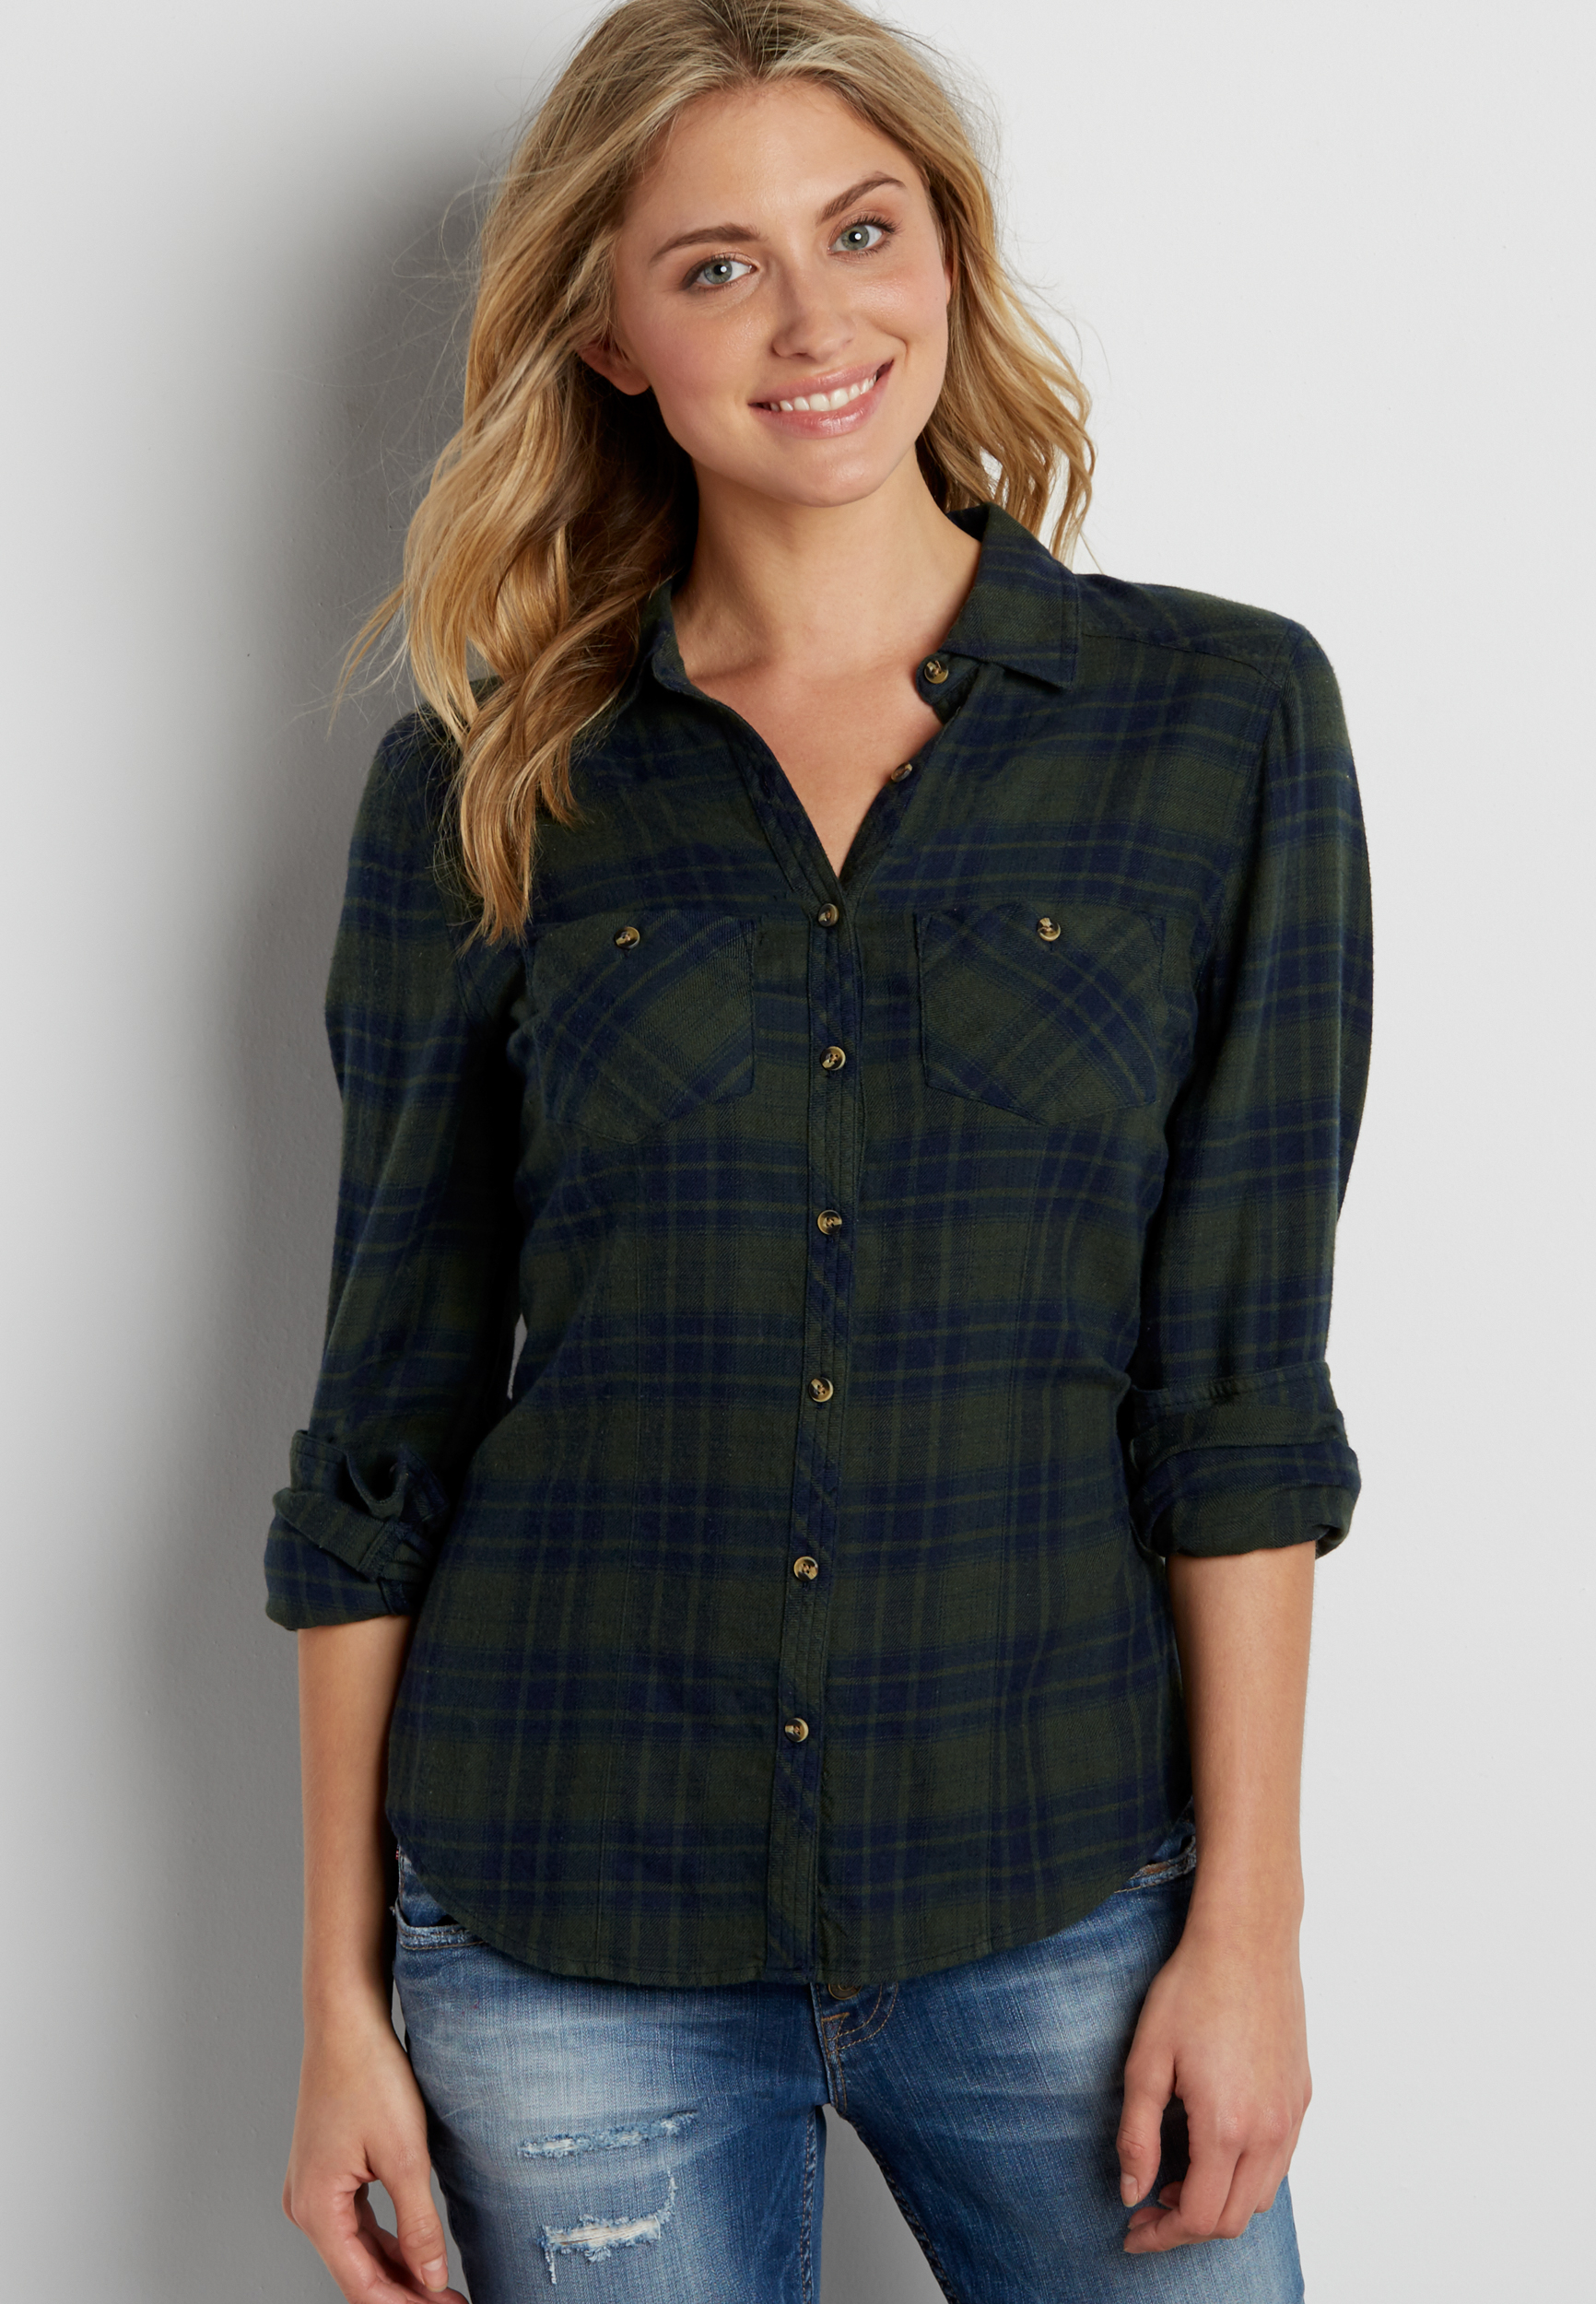 button down plaid shirt in navy blue and green | maurices